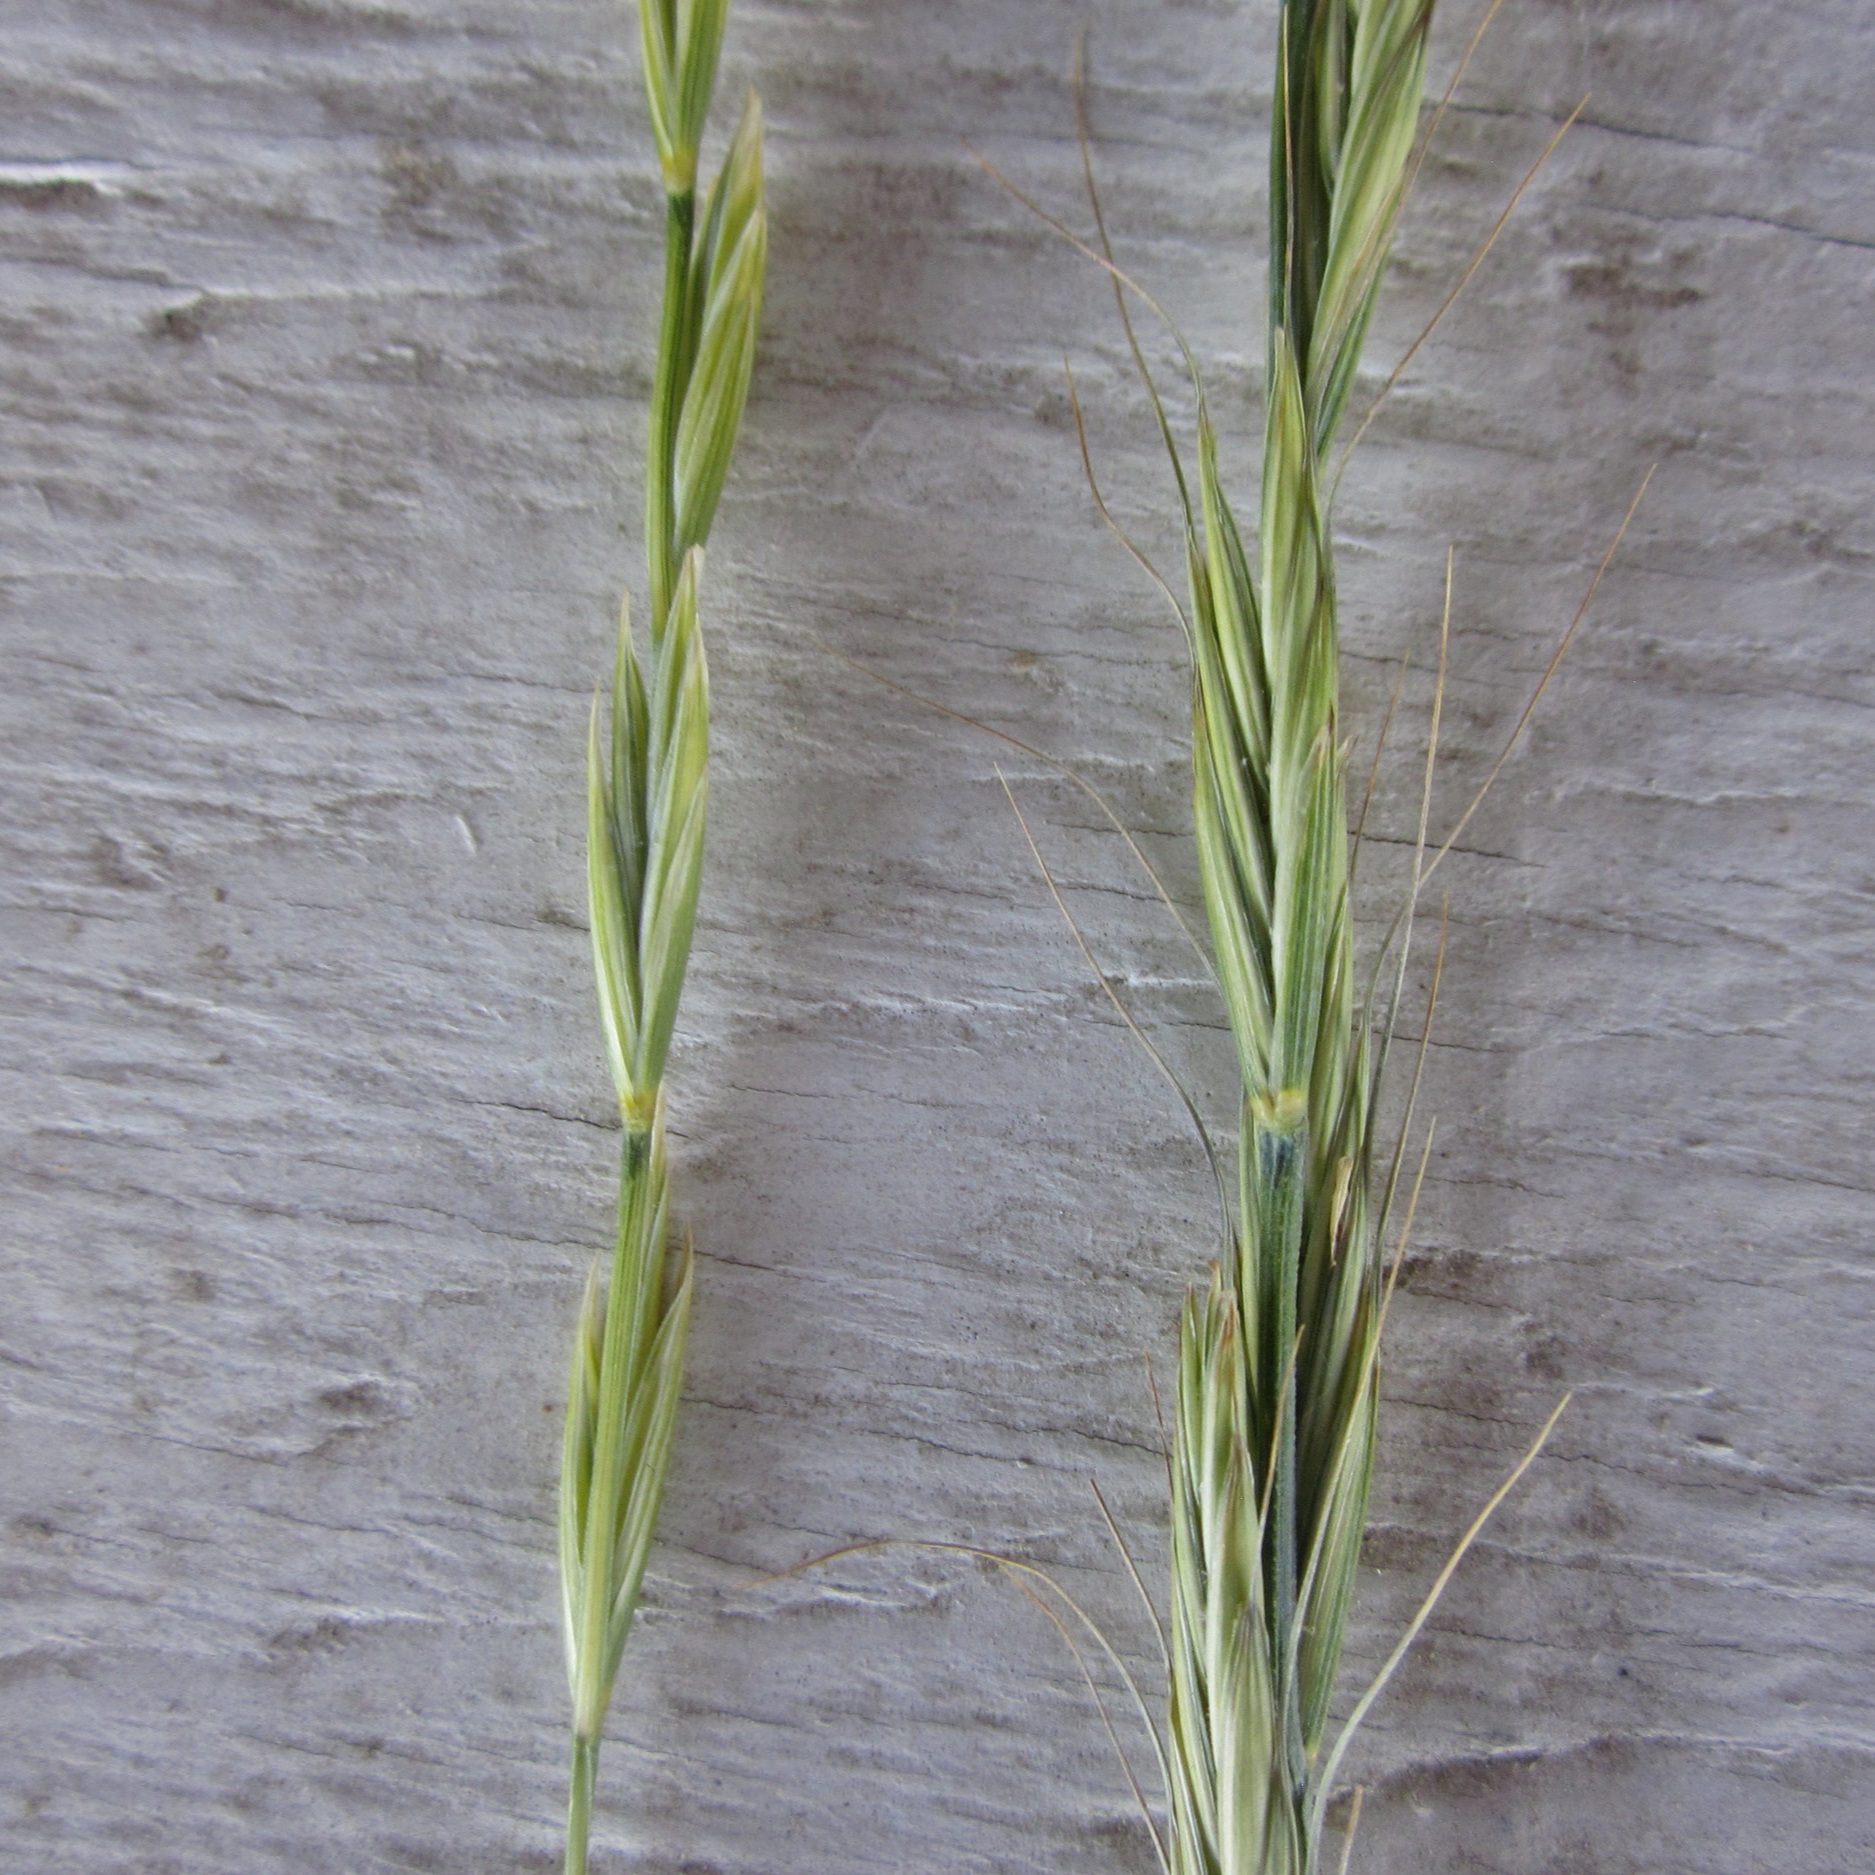  Beardless bluebunch wheatgrass (left) without the long awn typical of standard Bluebunch wheatgrass (right). 